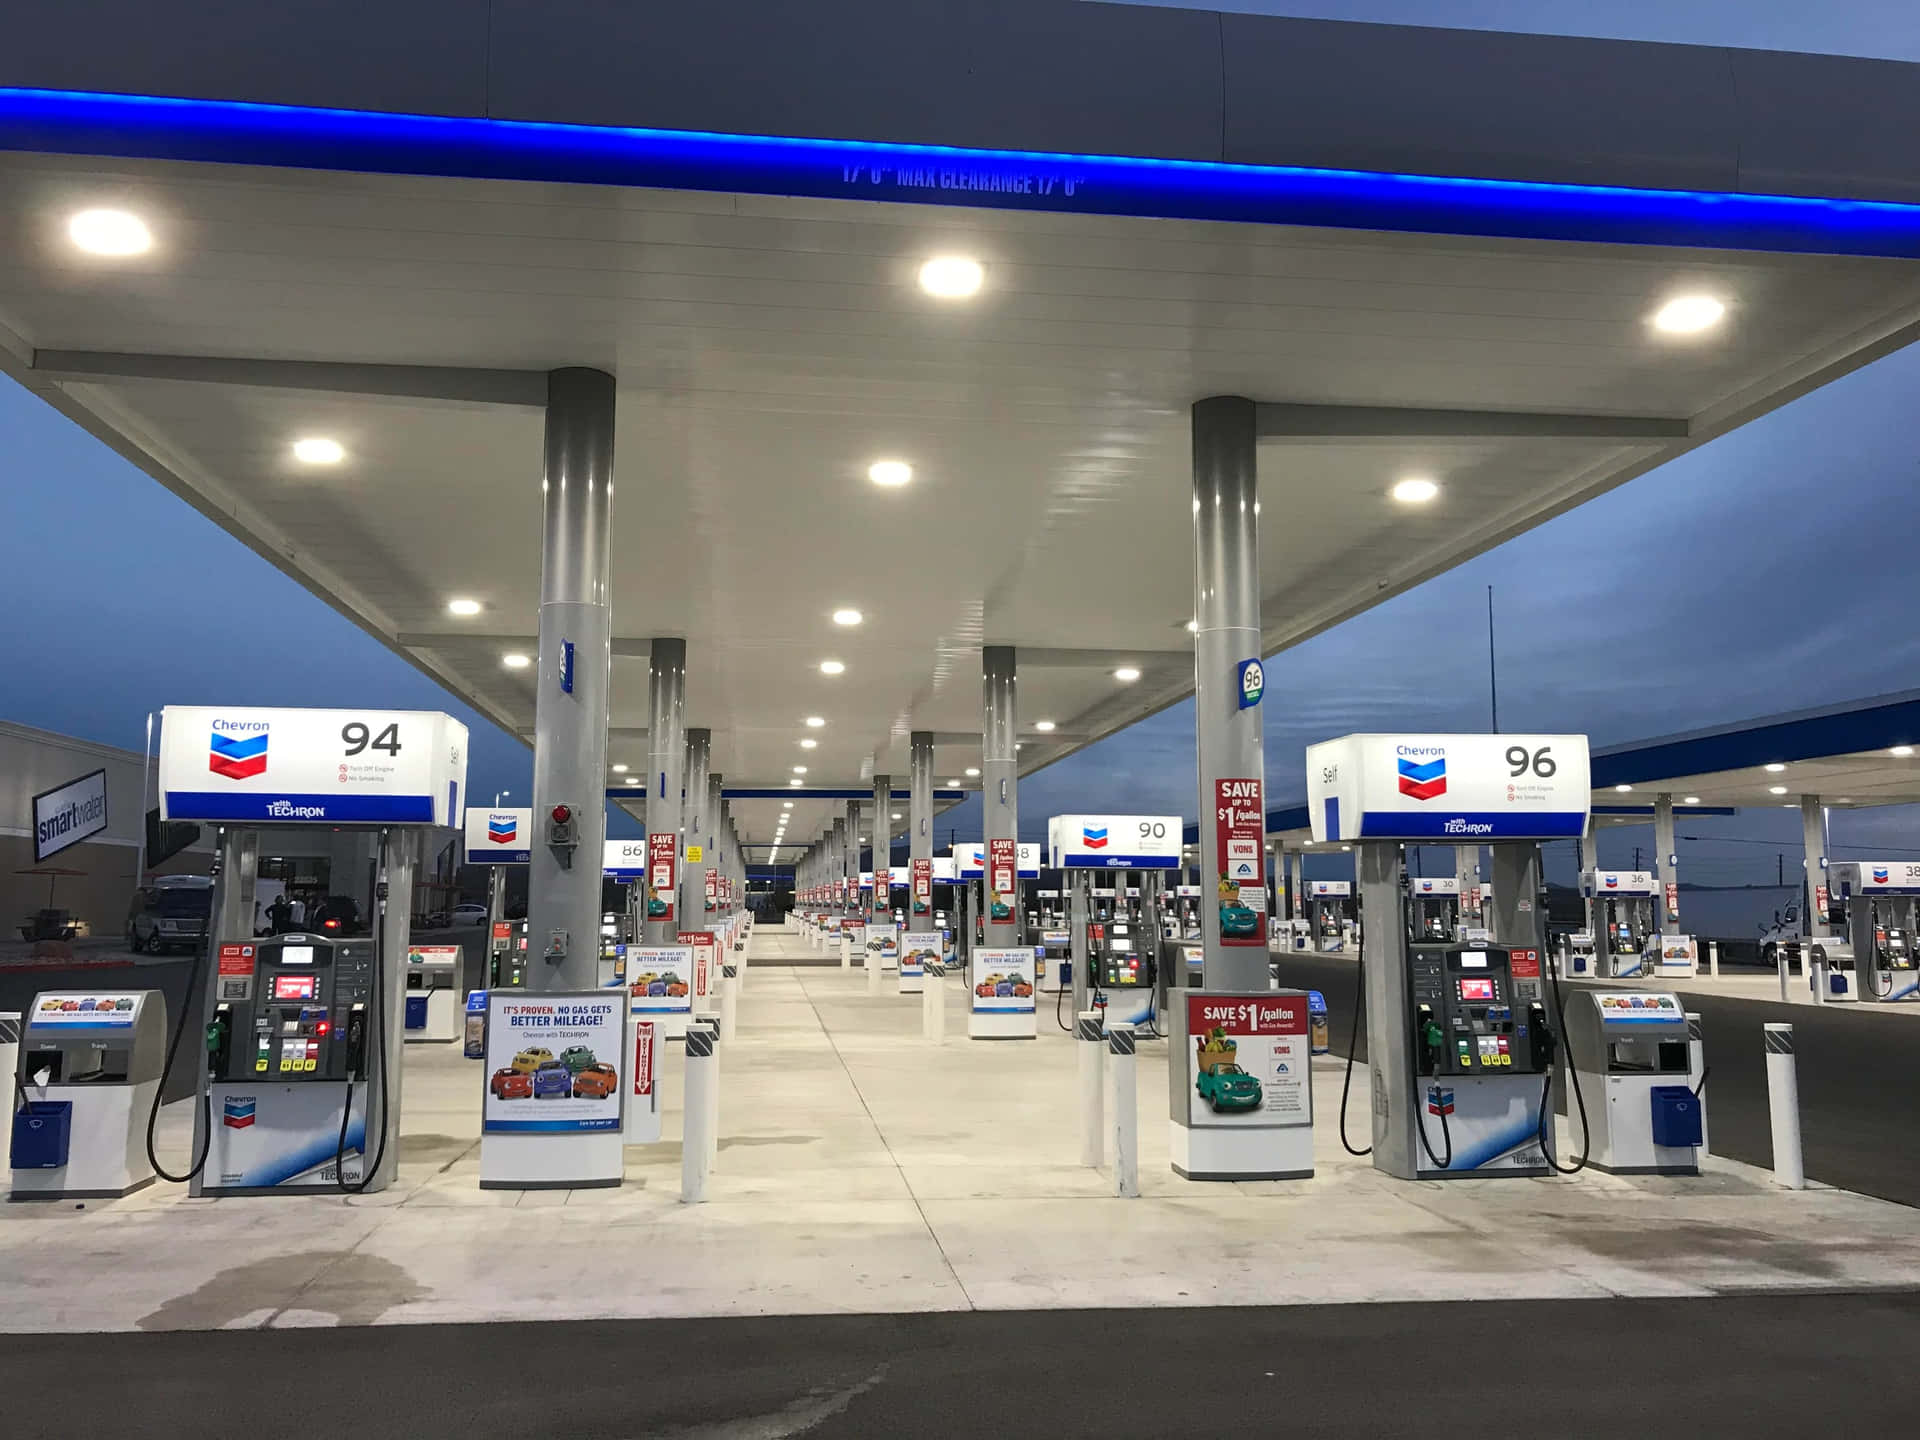 Get everything you need to fuel a better journey at our gas station.